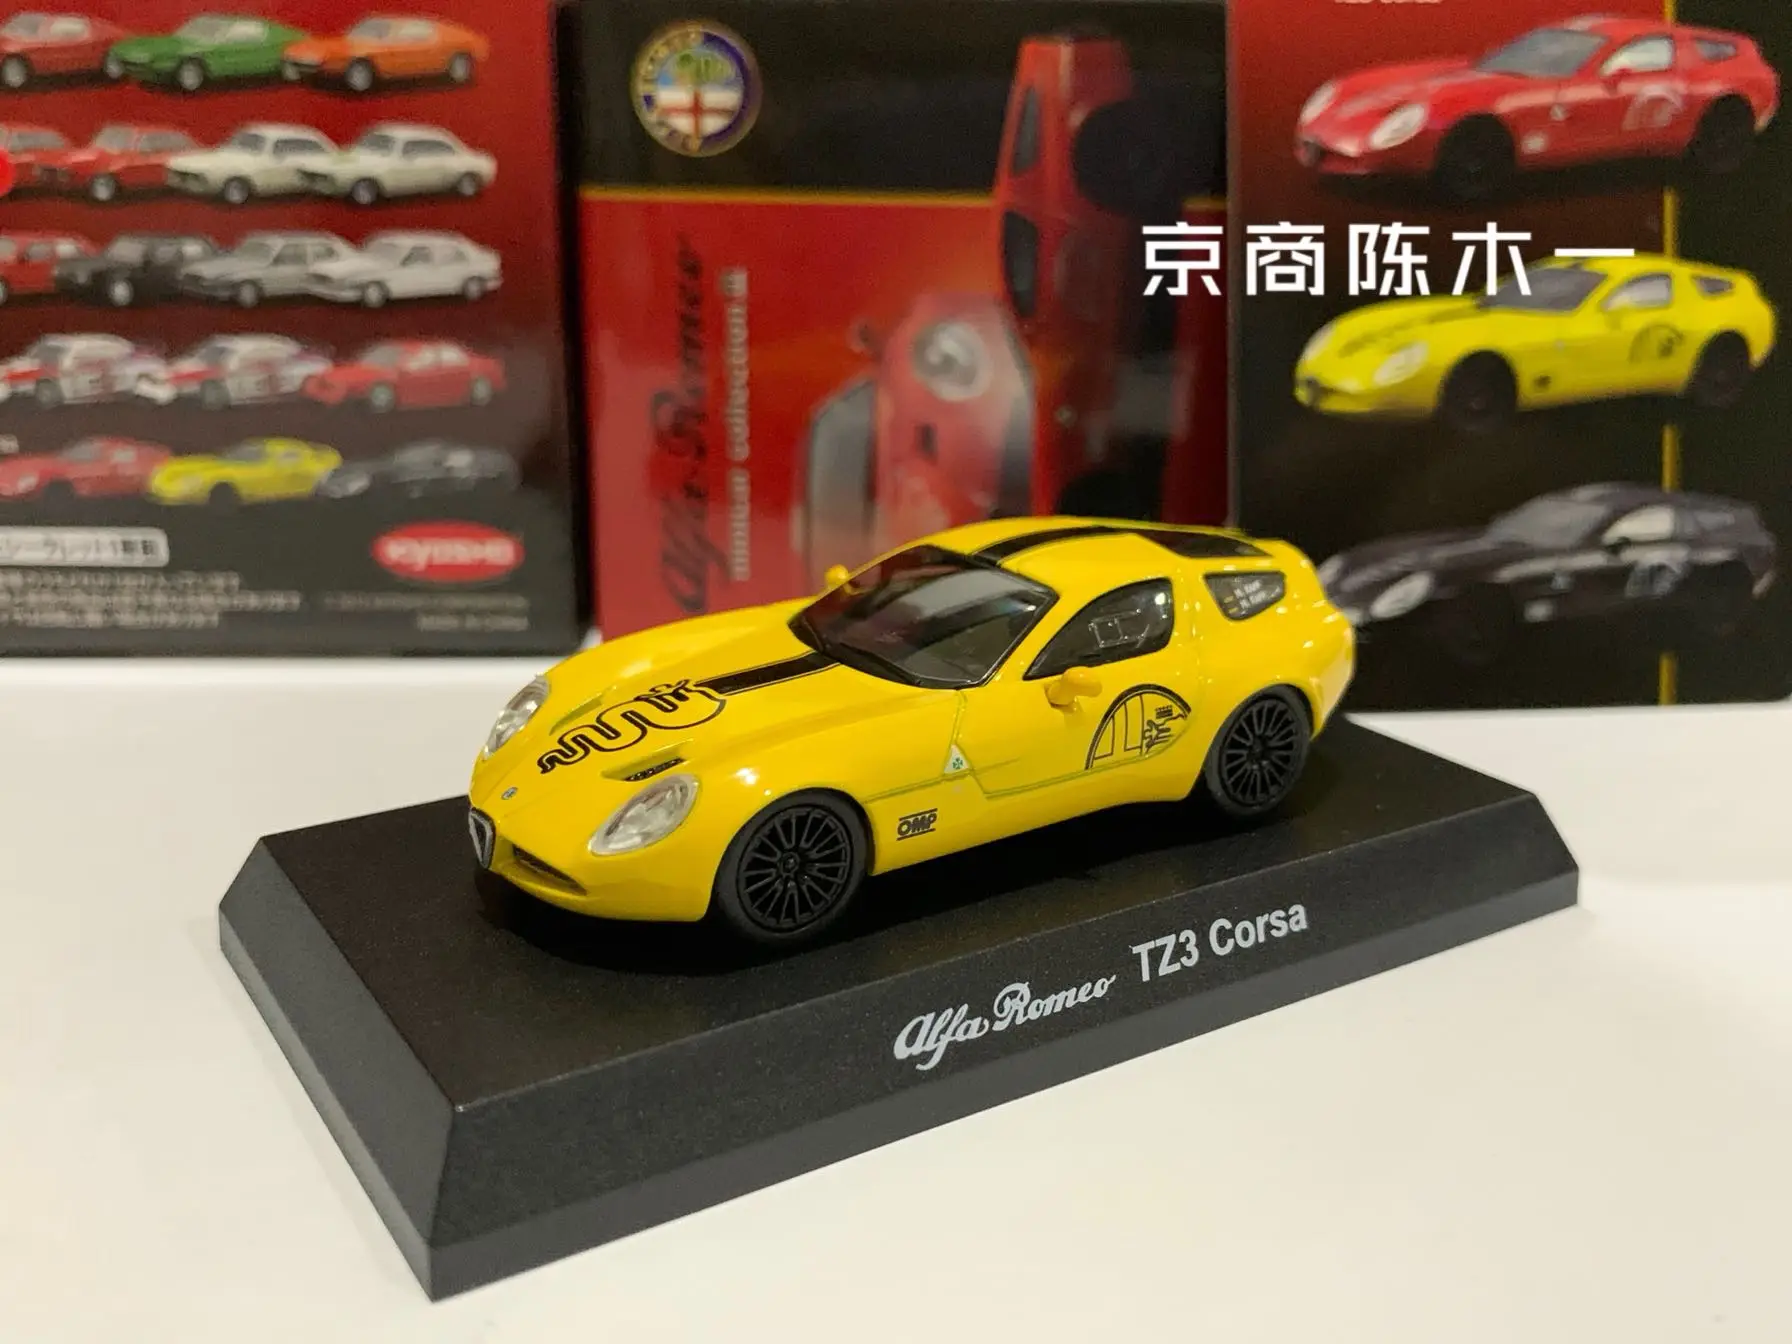 

1/64 KYOSHO Alfa Romeo TZ3 Corsa Collection of die-cast alloy car decoration model toys